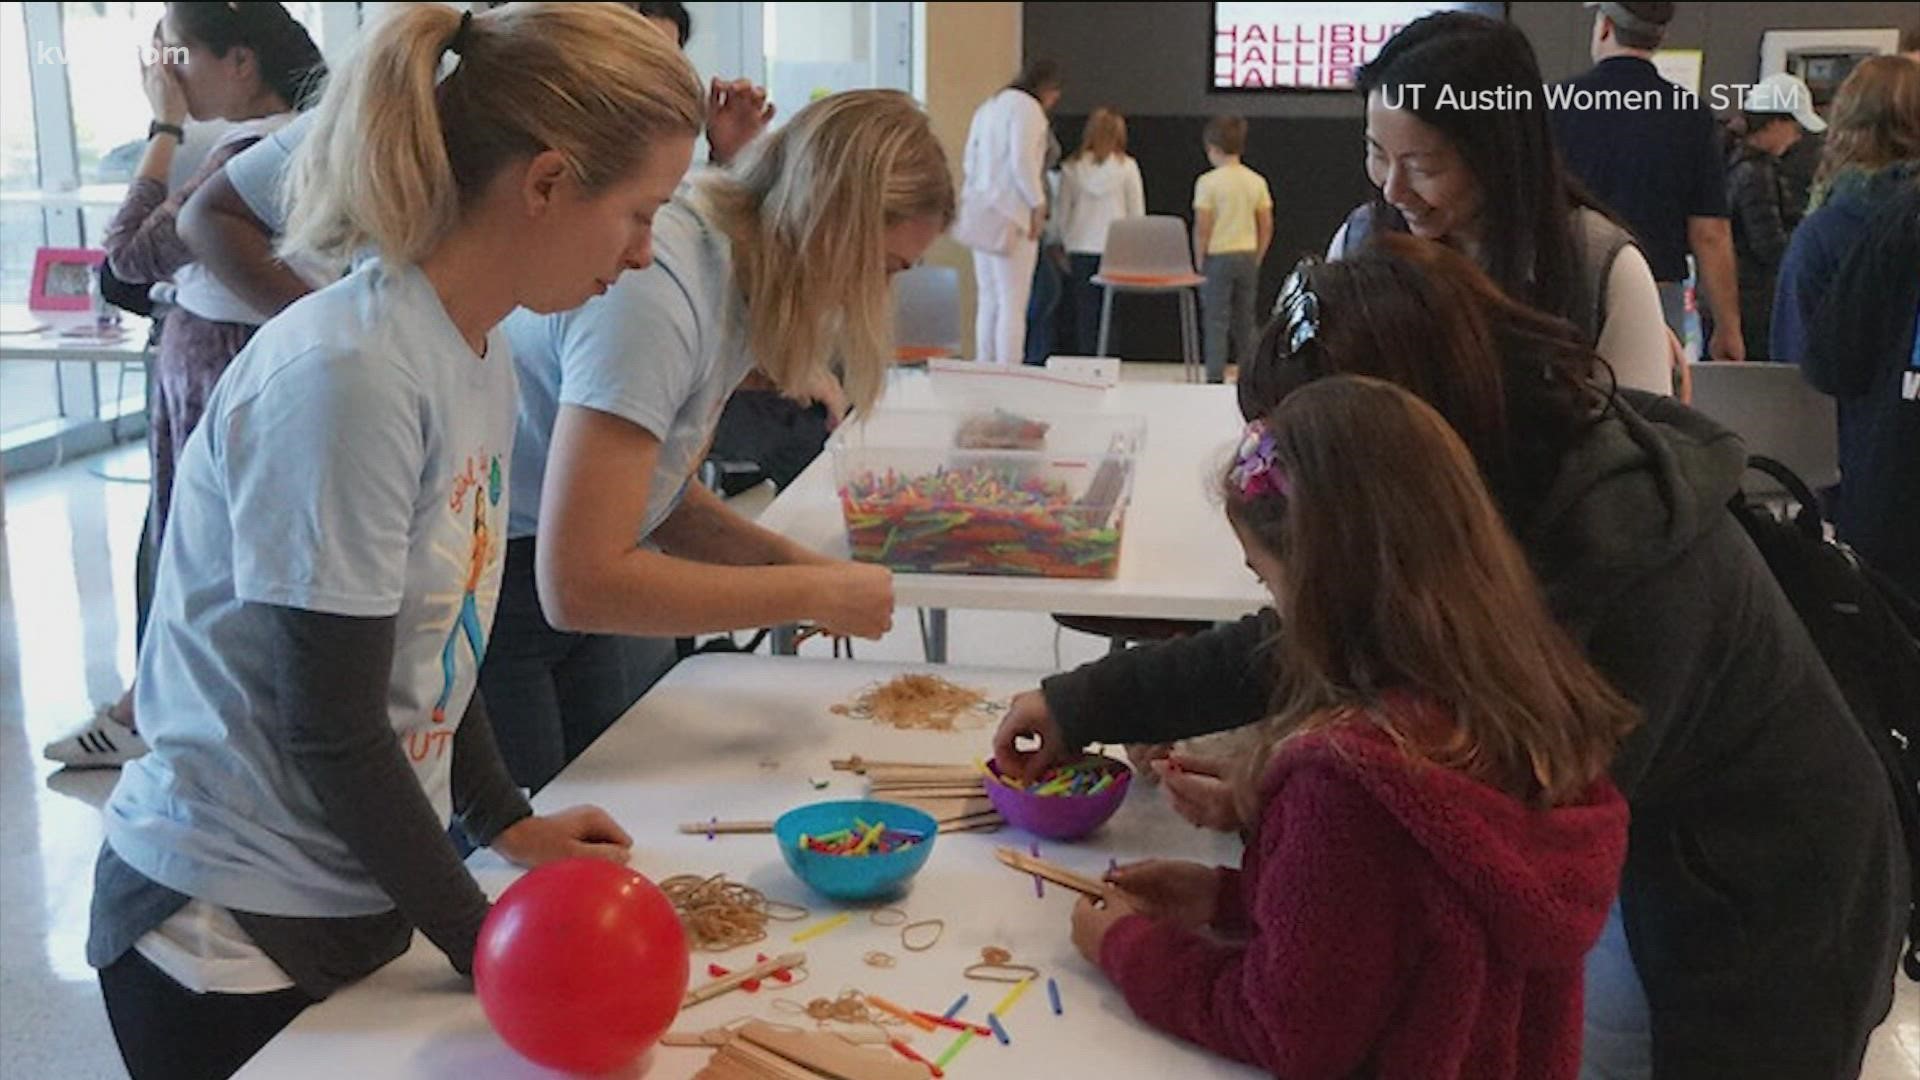 WiSTEM, Women in STEM, hosts its big annual Girl Day at UT event, bringing together thousands of K-12 students for a day of hands-on STEM activities.